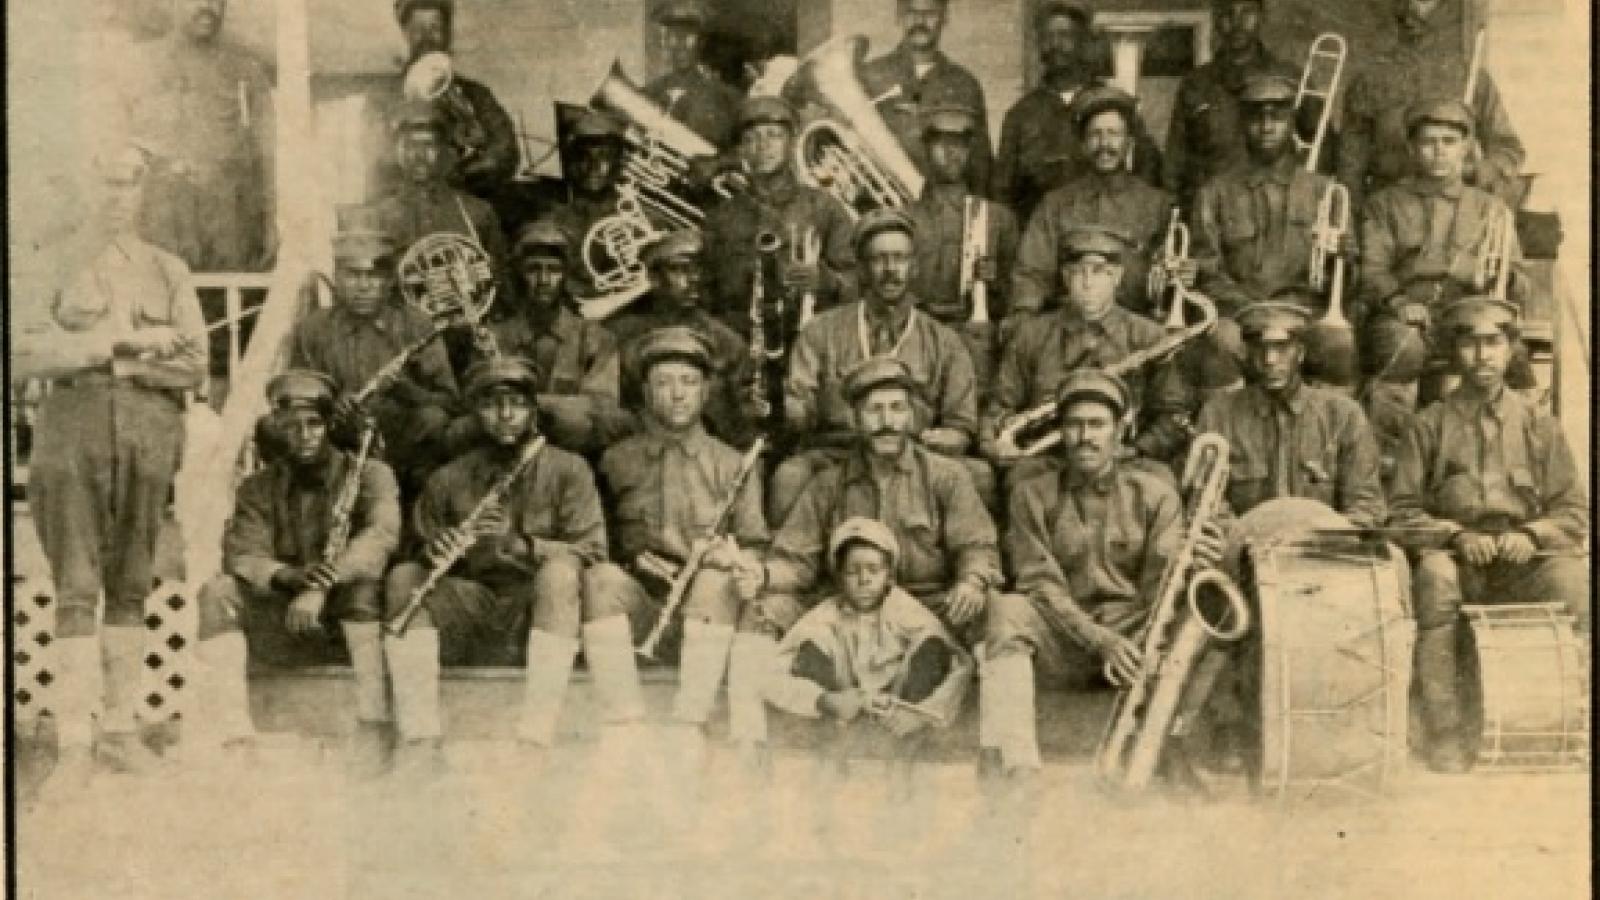 Members of The Second Regiment Marching Band. Columbus, Ohio, 1910.